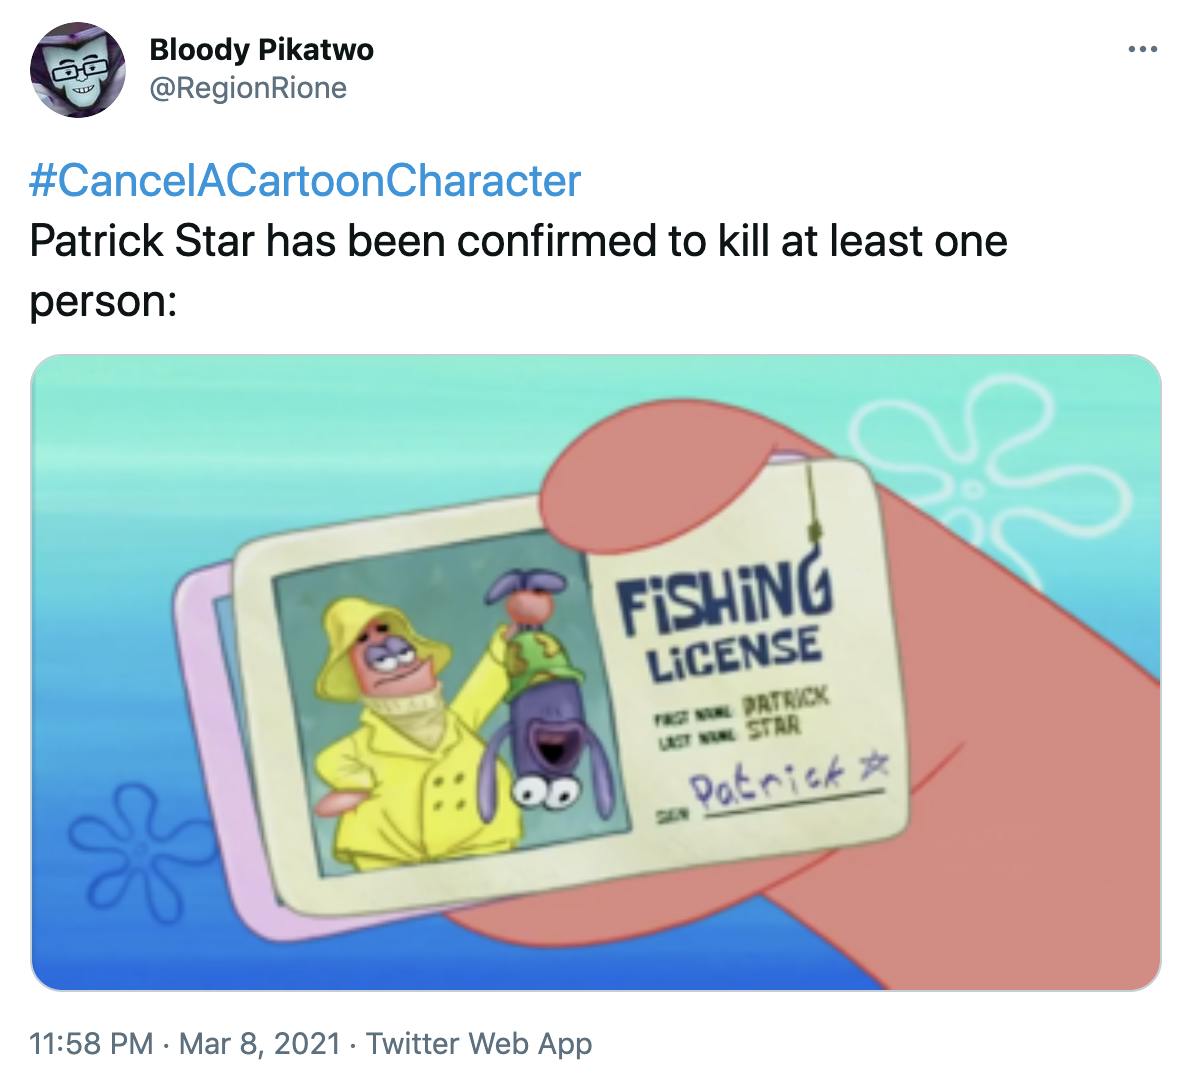 '#CancelACartoonCharacter Patrick Star has been confirmed to kill at least one person:' A fishing license showing Patrick Star in yellow waterproof get up holding a distressed purple fish in swim trunks upside down